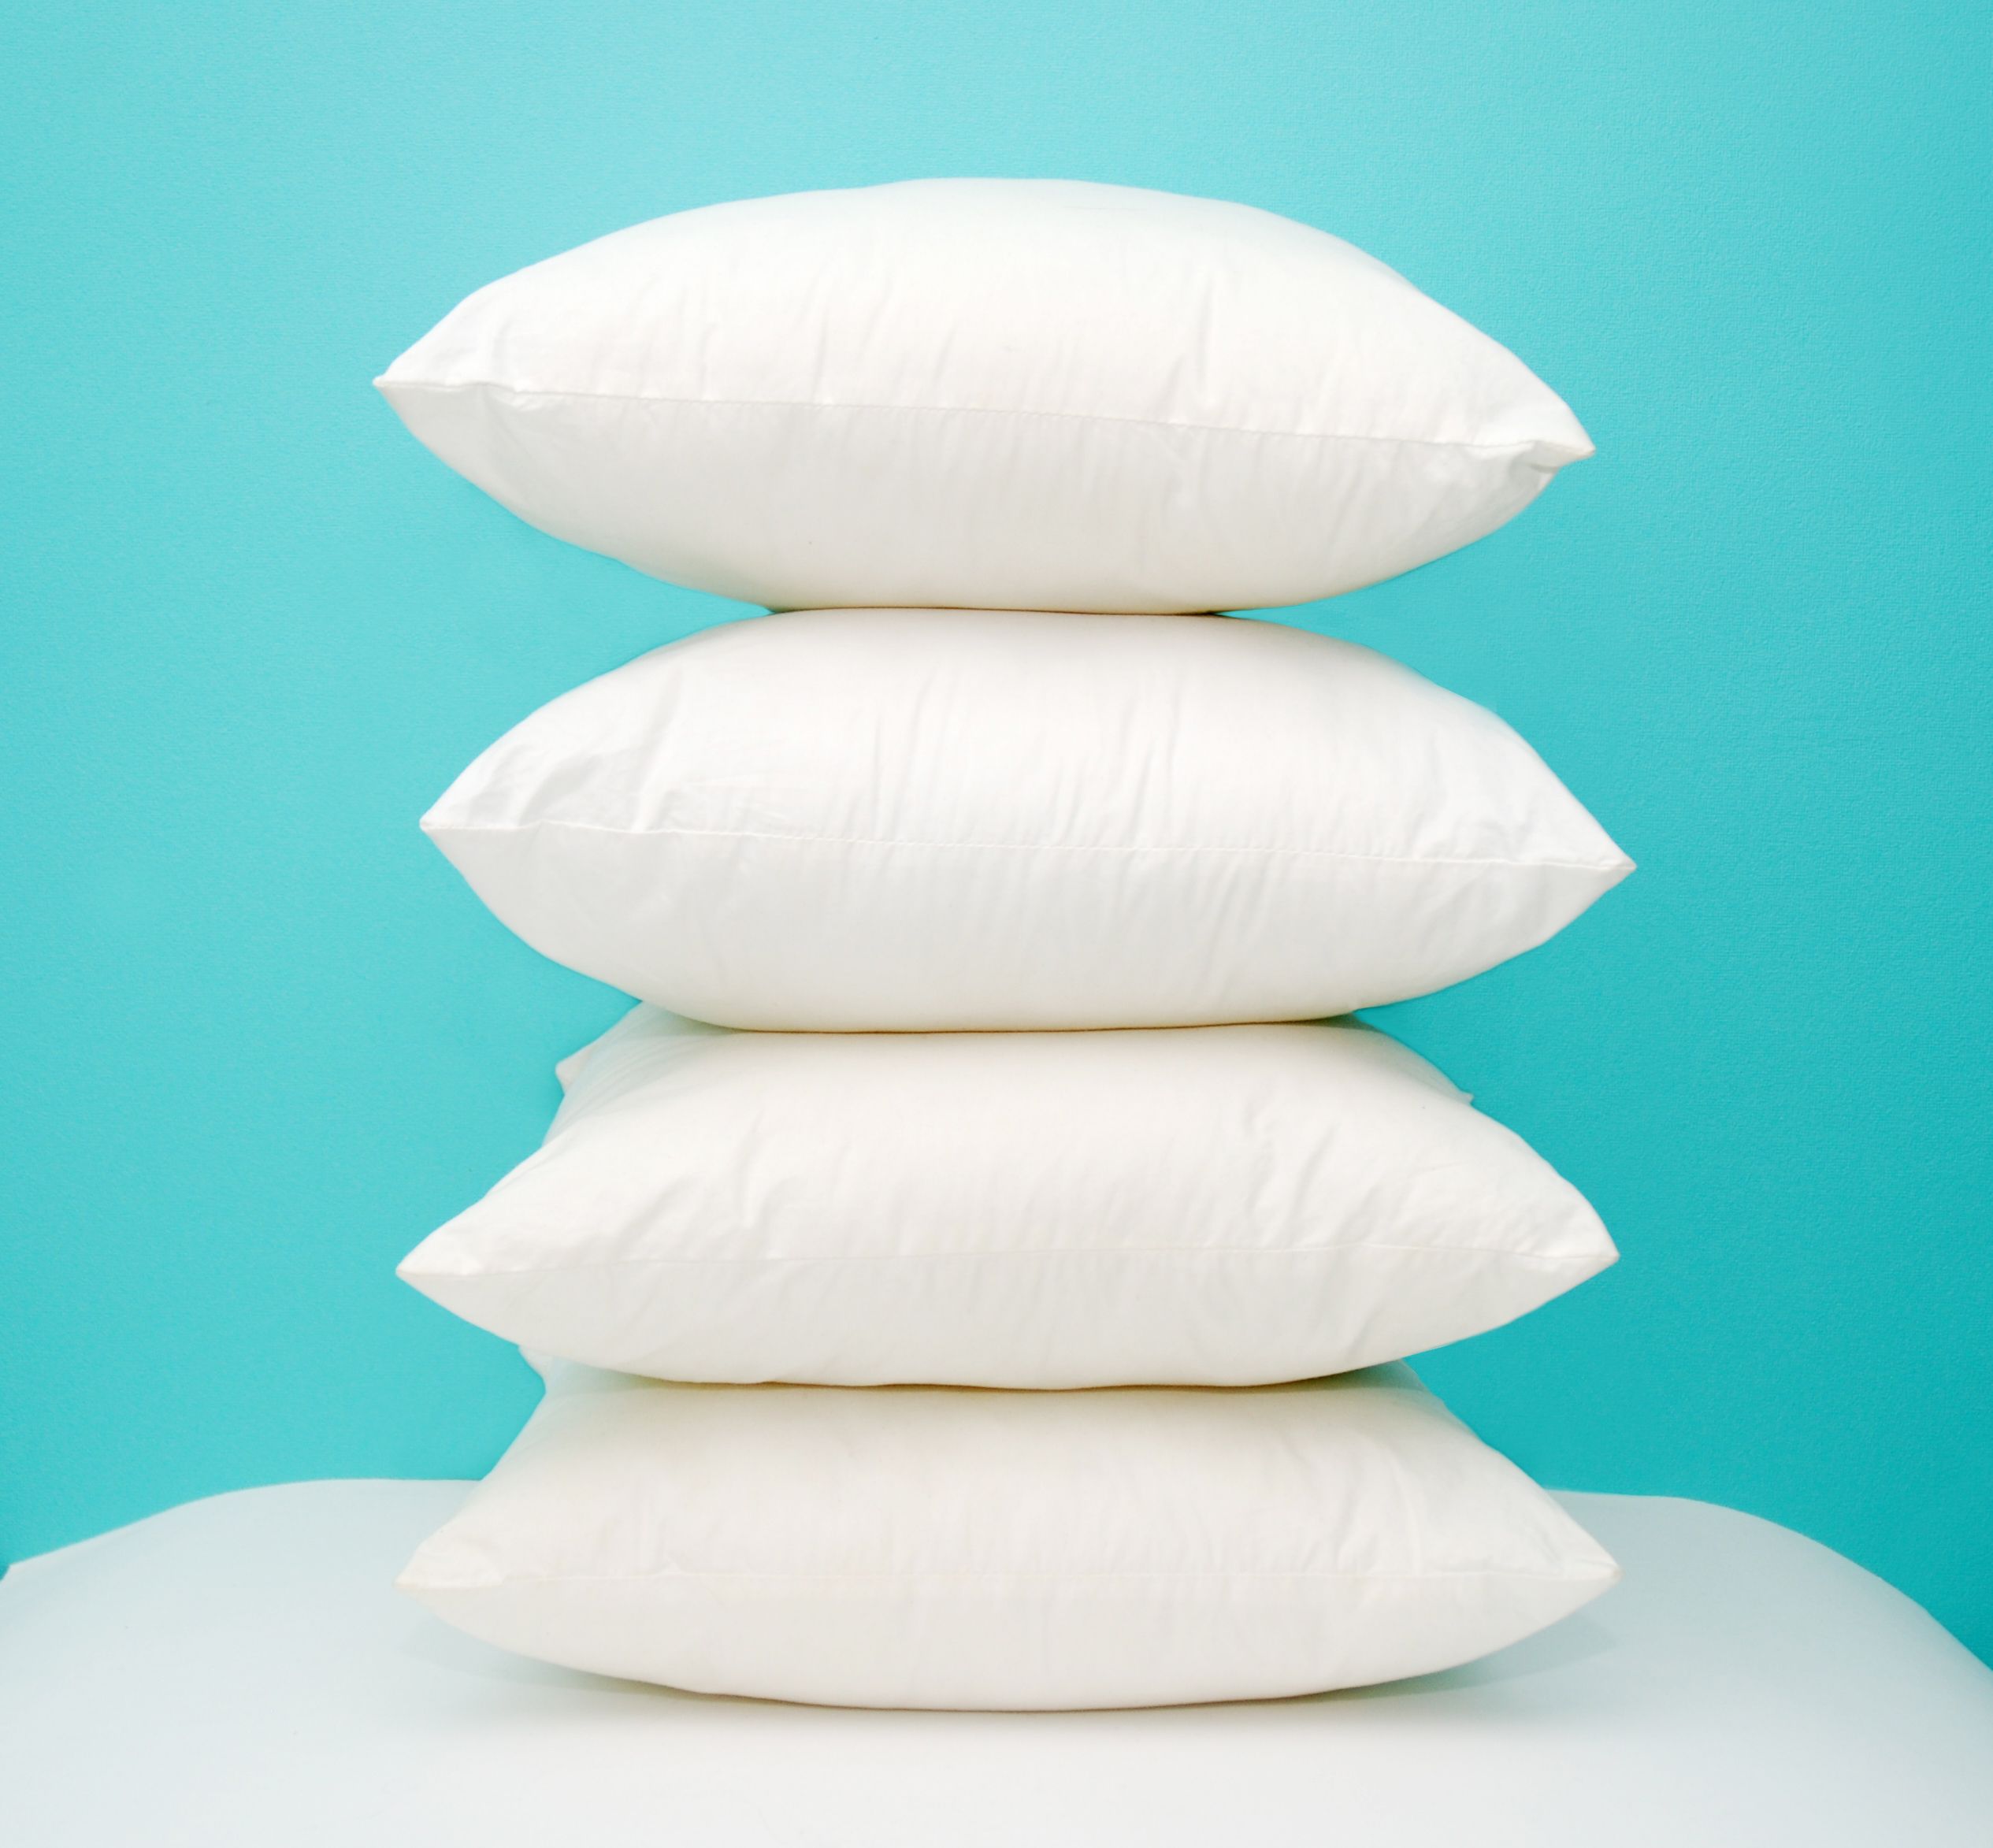 Pillow Buying Guide: Choose Best Pillow for Side, Back & Stomach